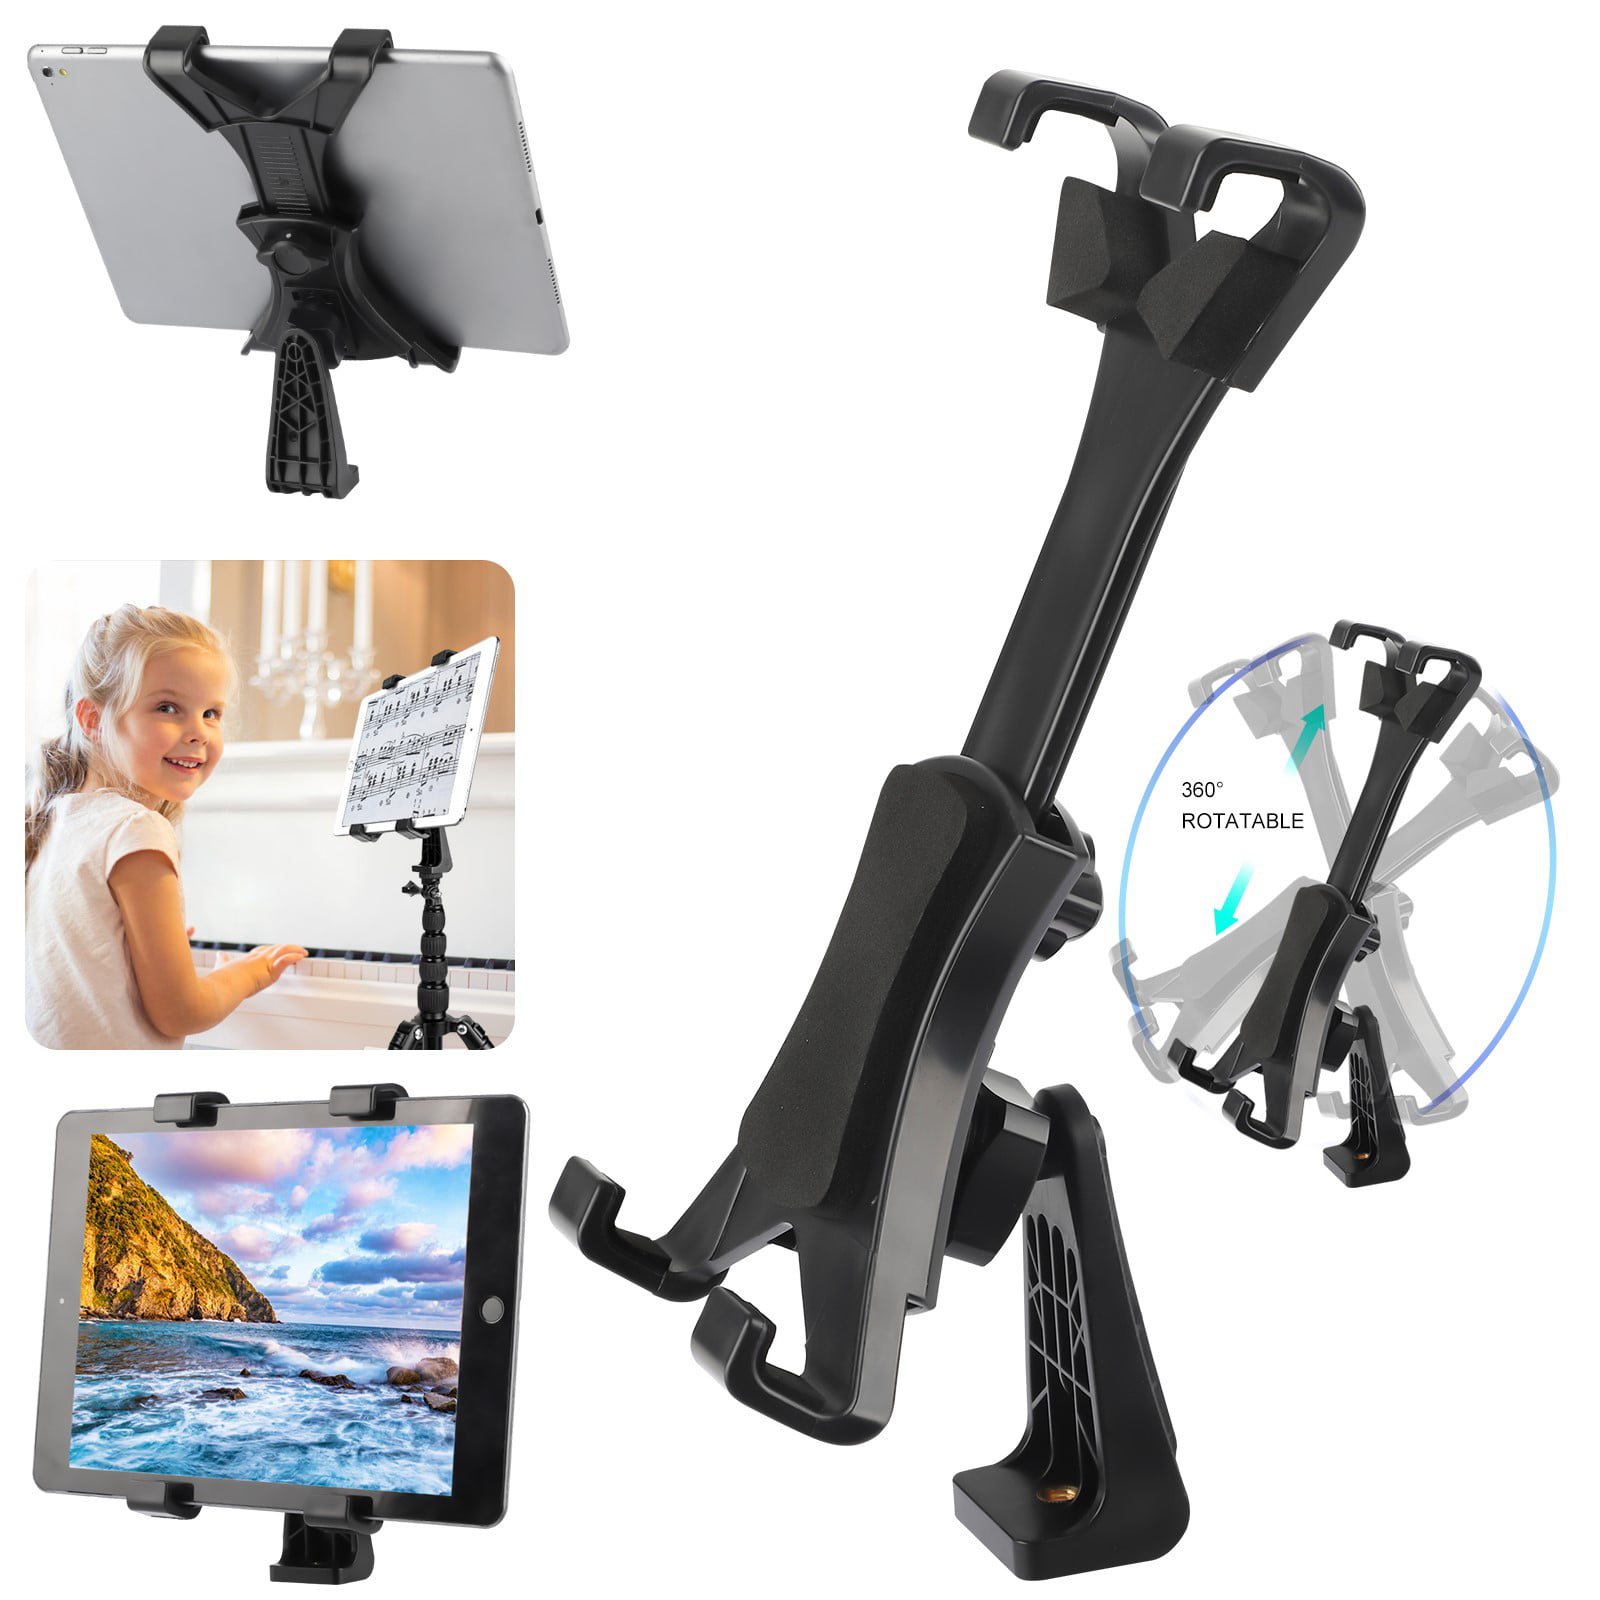 Wall Mount fixed with plate for Tablet+Universal Holder for iPad,Galaxy Note10.1 